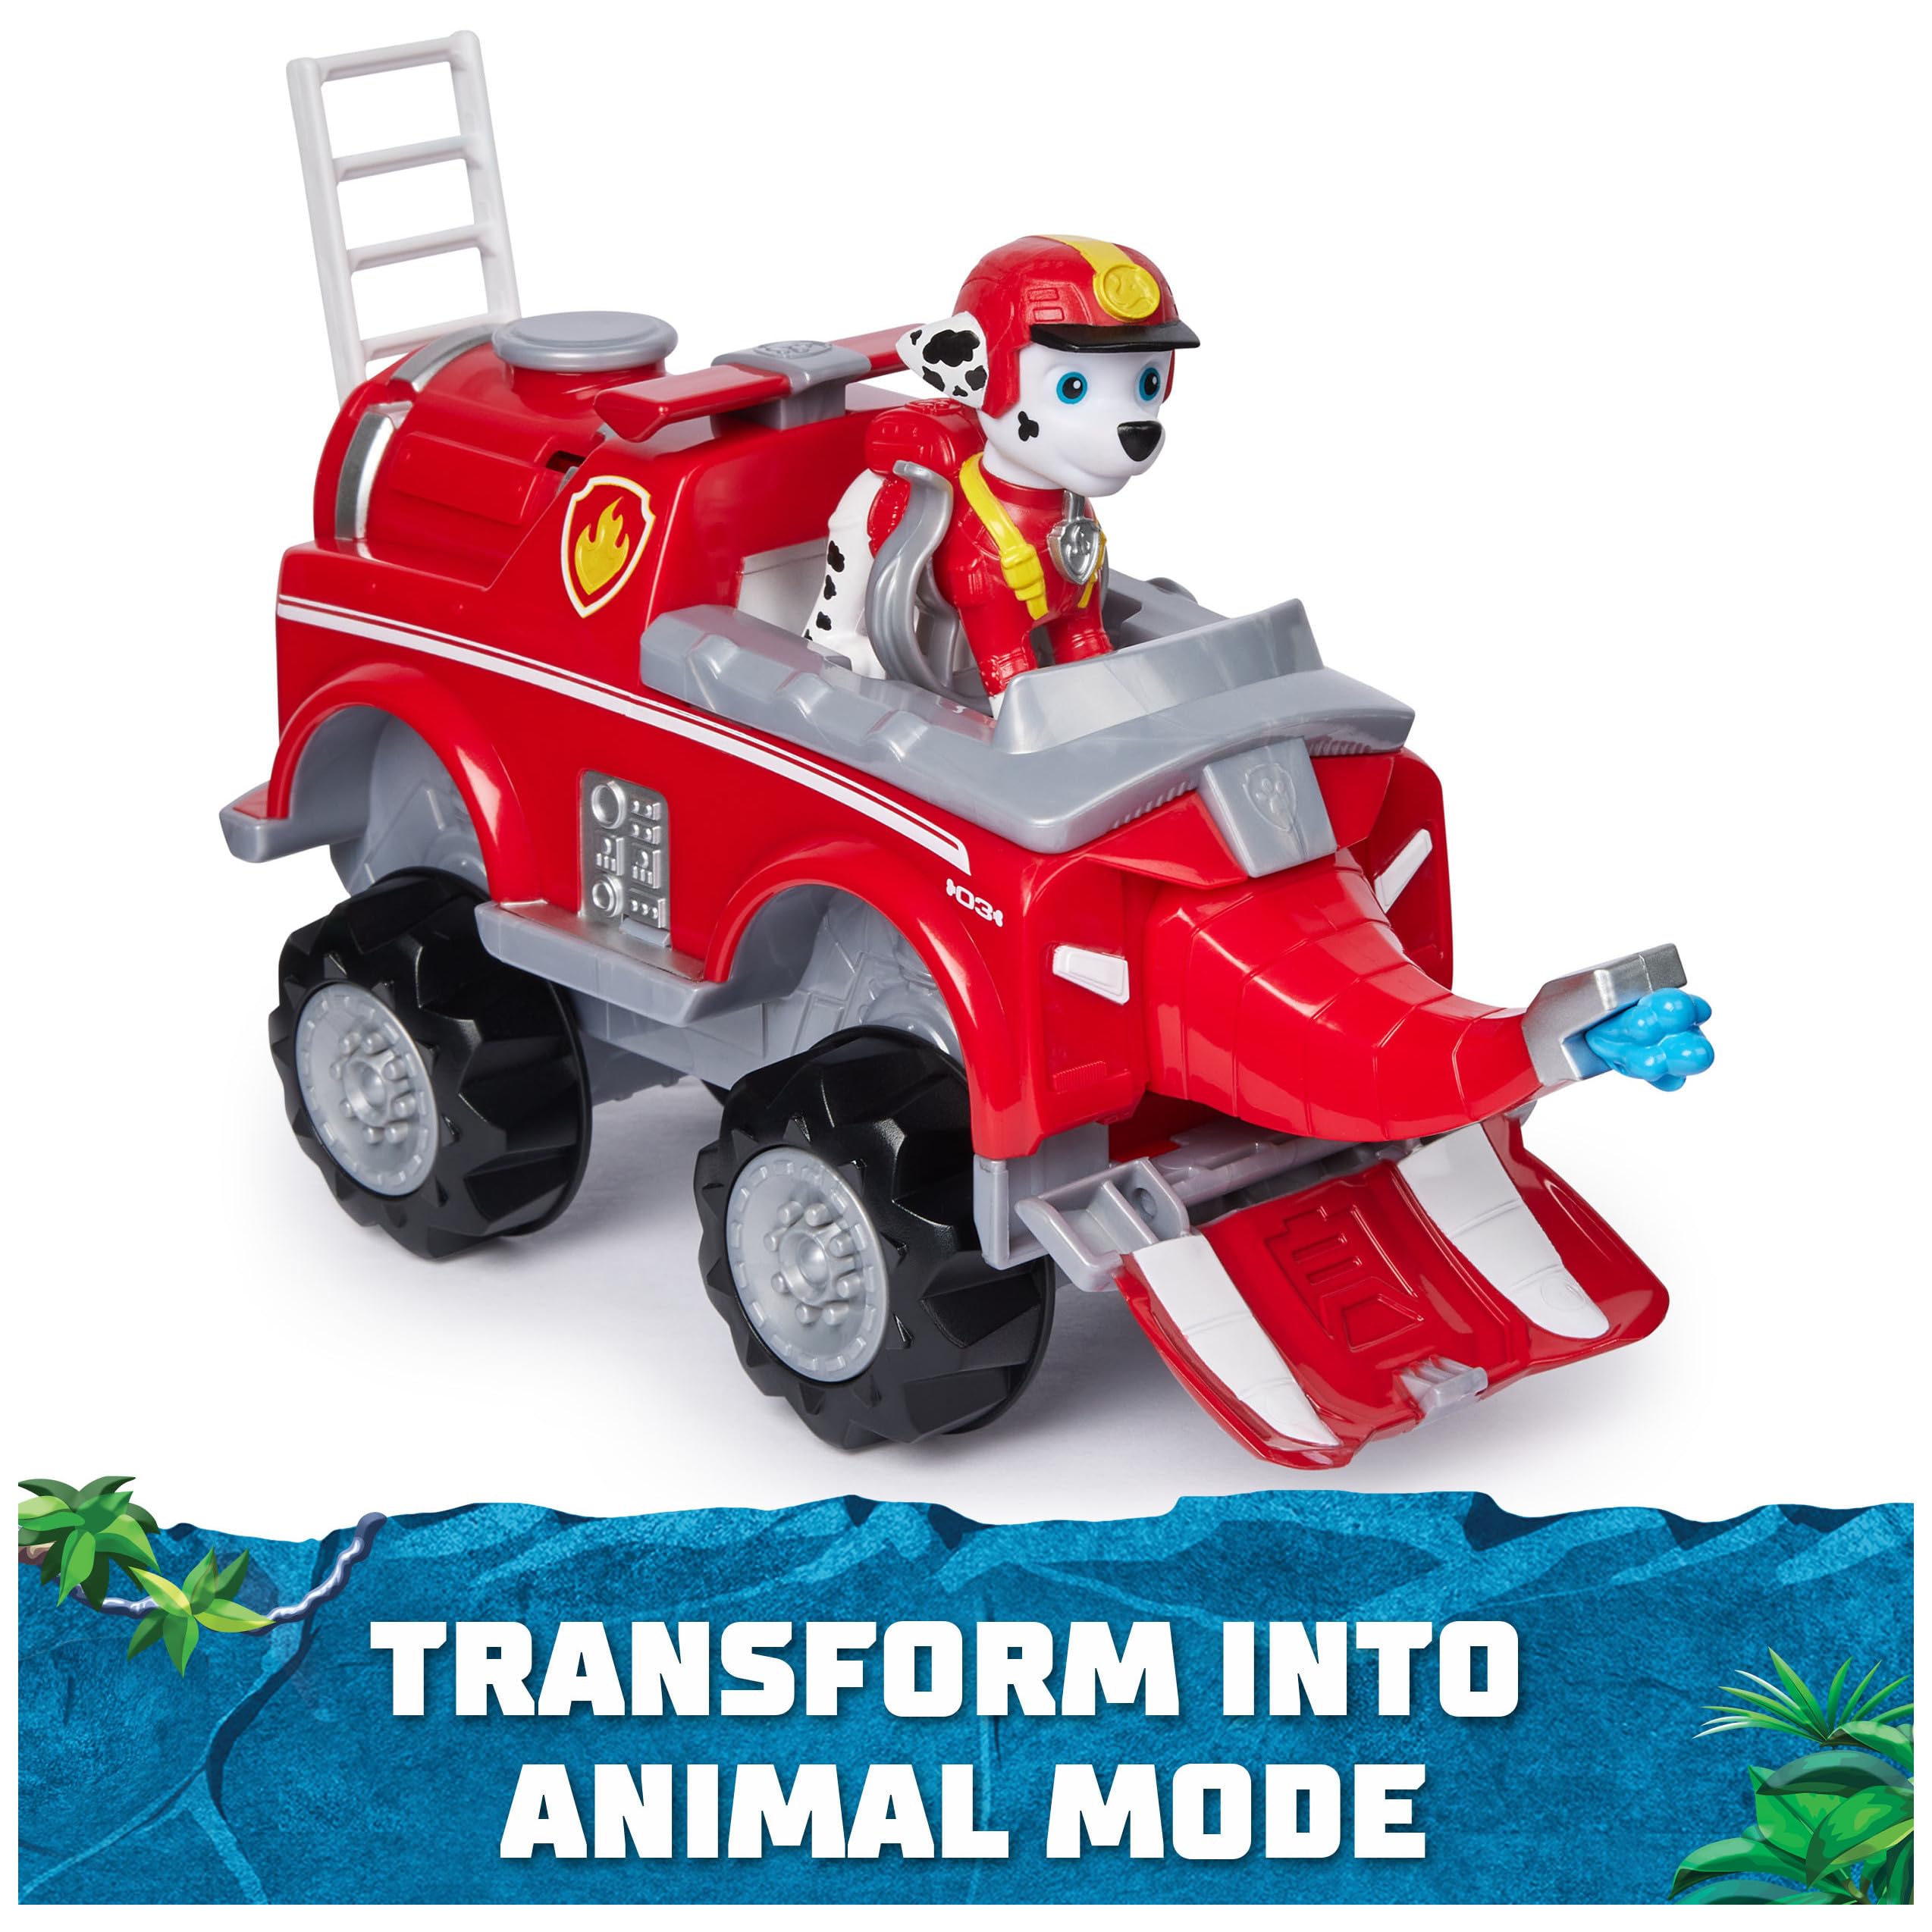 Paw Patrol Jungle Pups, Marshall Elephant Vehicle, Toy Truck with Collectible Action Figure, Kids Toys for Boys & Girls Ages 3 and Up